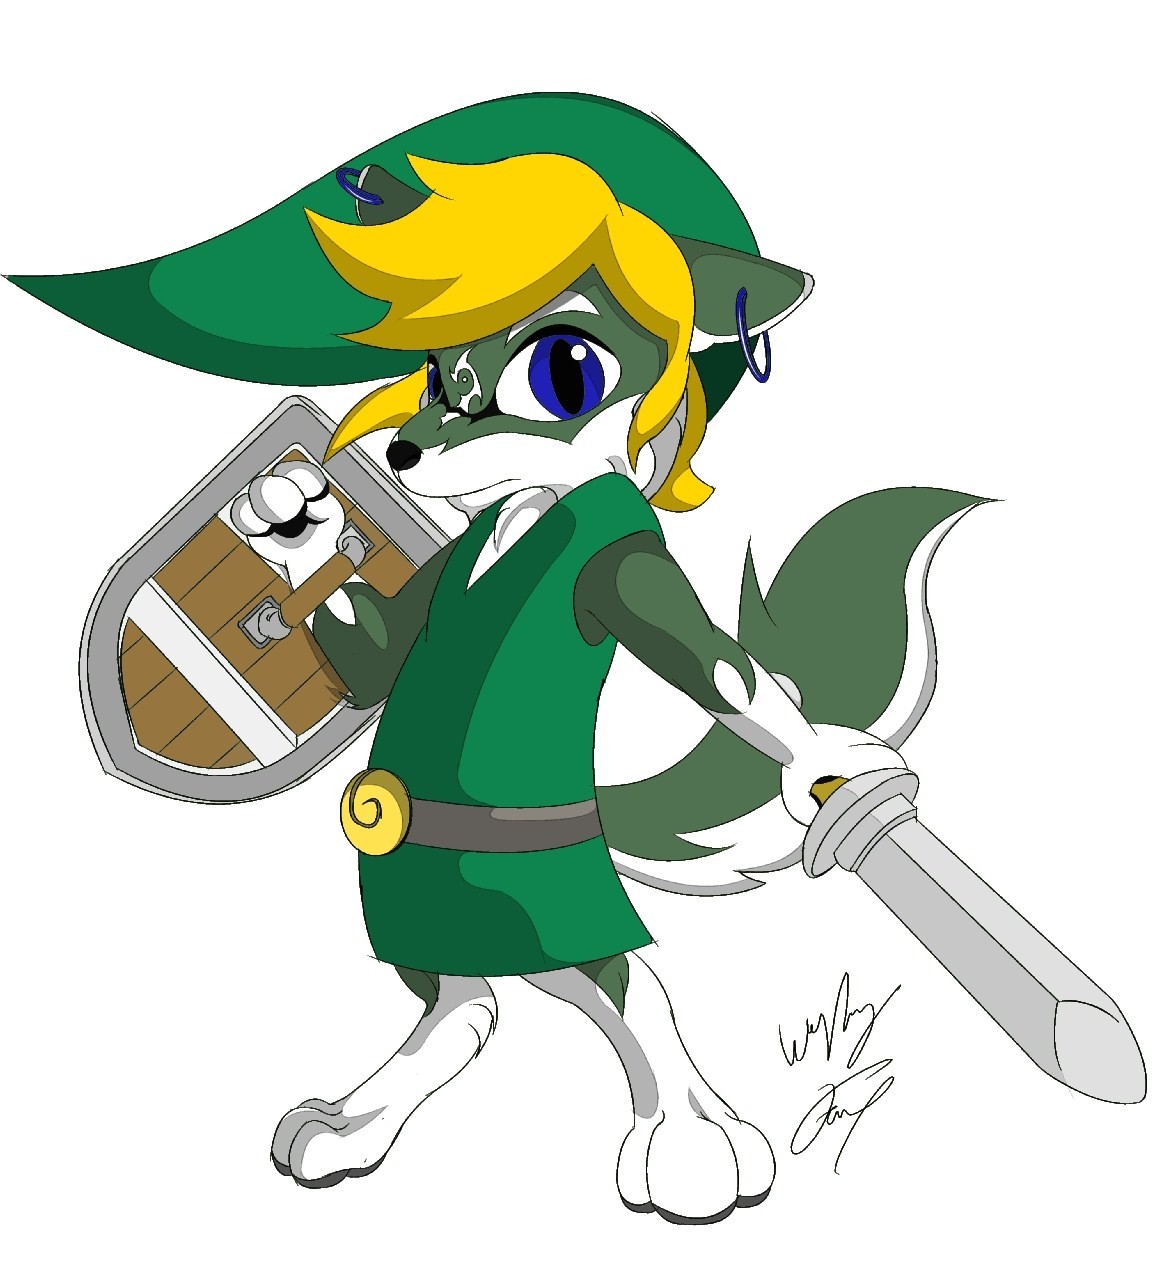 Toon Link Wind Waker Wallpaper Toon wolf link color by